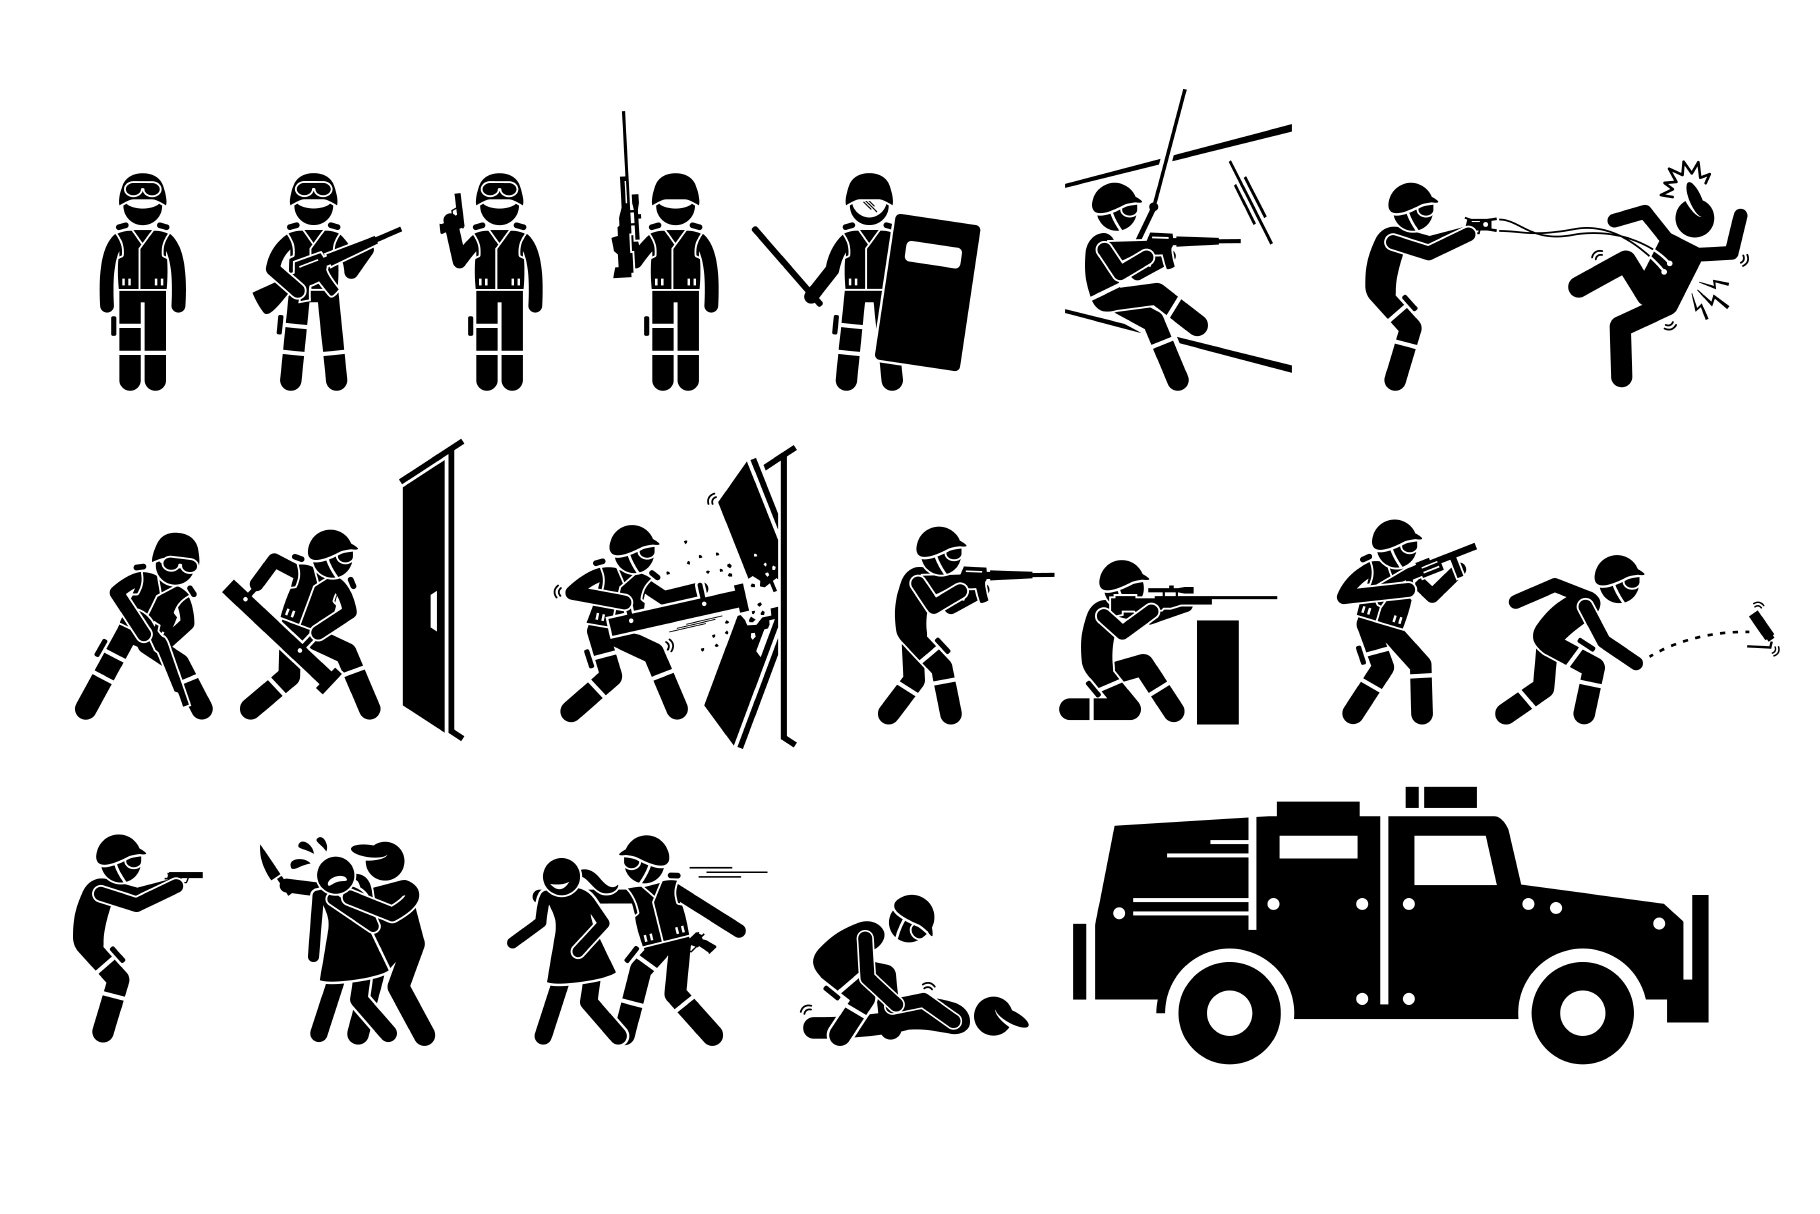 16 different images of special forces and special forces tactics on a white background.